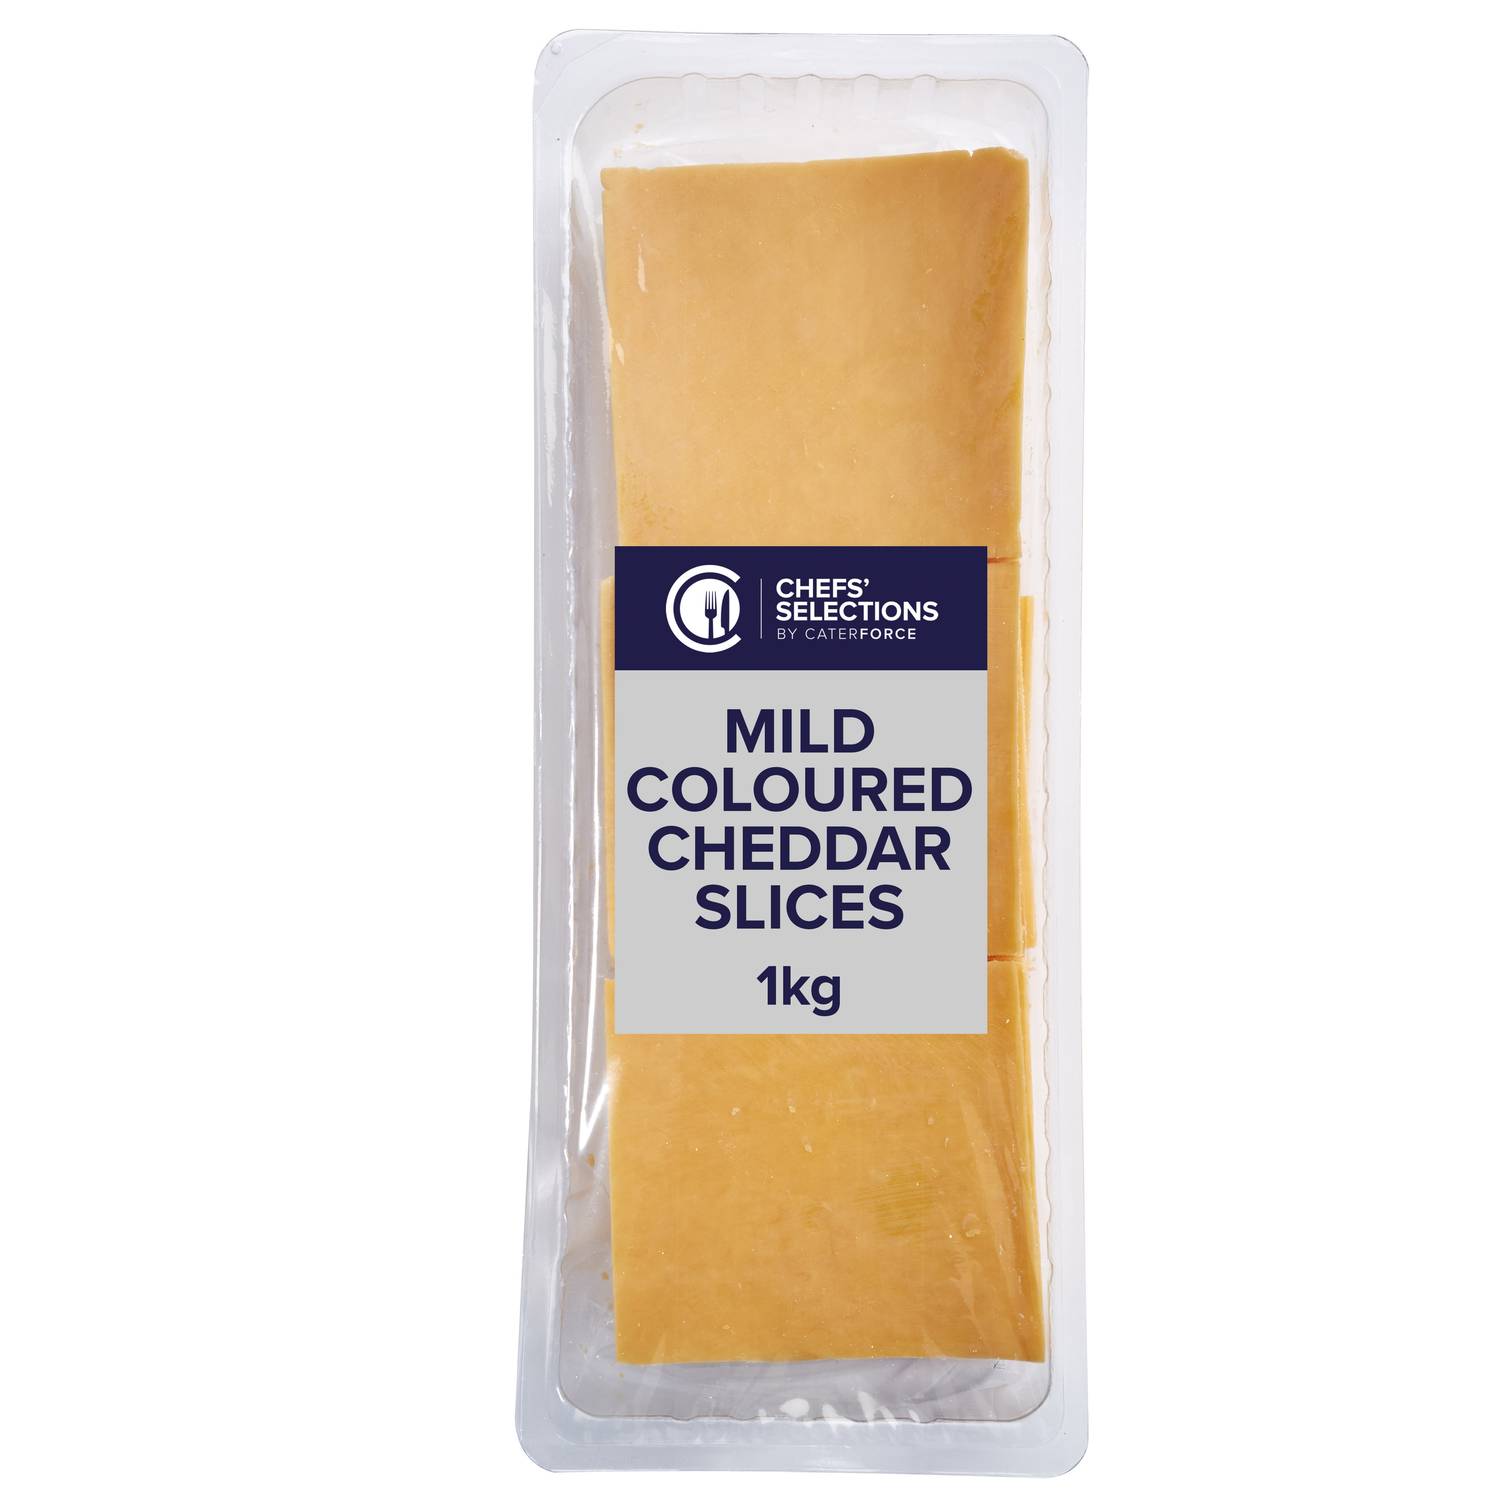 Chefs’ Selections Mild Coloured Cheddar Cheese Slices (6 x 1kg)